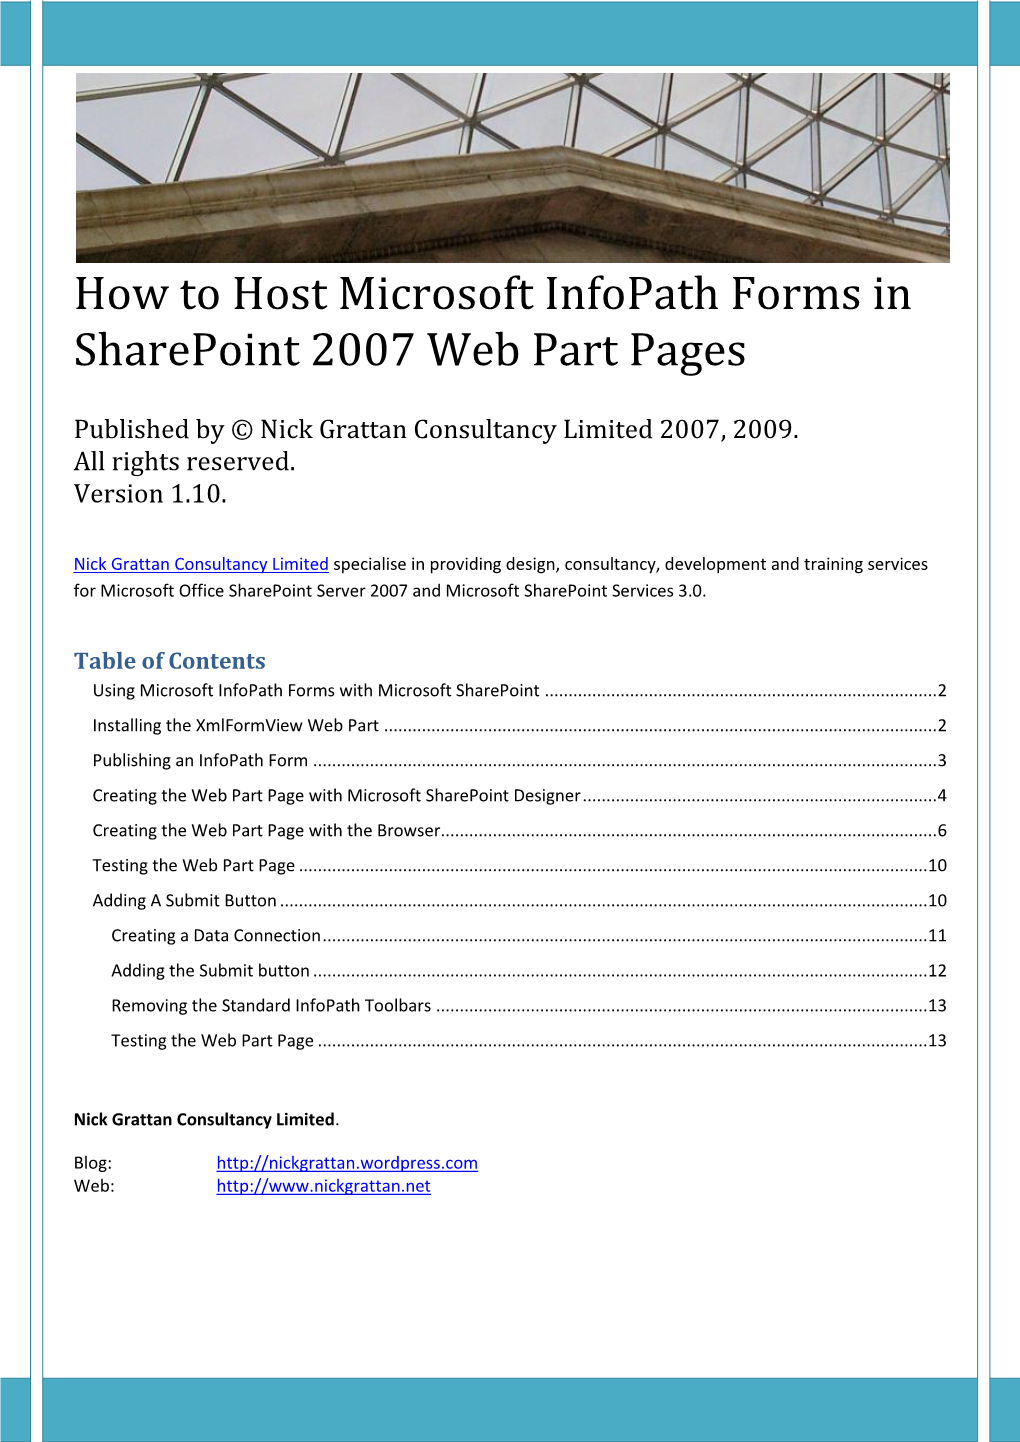 How to Host Microsoft Infopath Forms in Sharepoint 2007 Web Part Pages